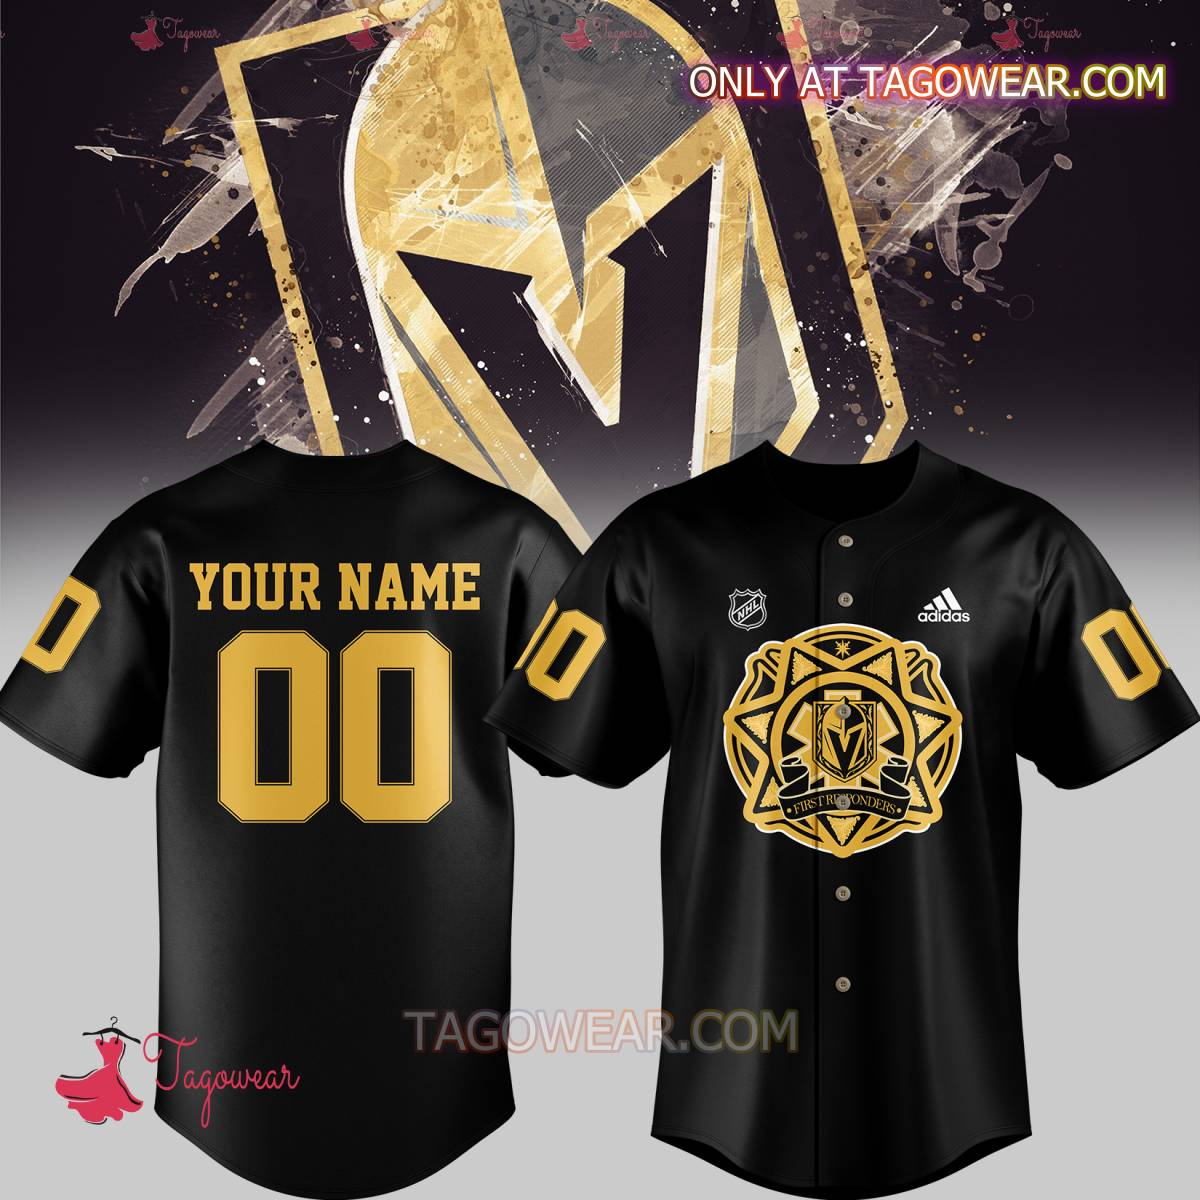 NHL Vegas Golden Knights Honoring Our First Responders Personalized Baseball Jersey